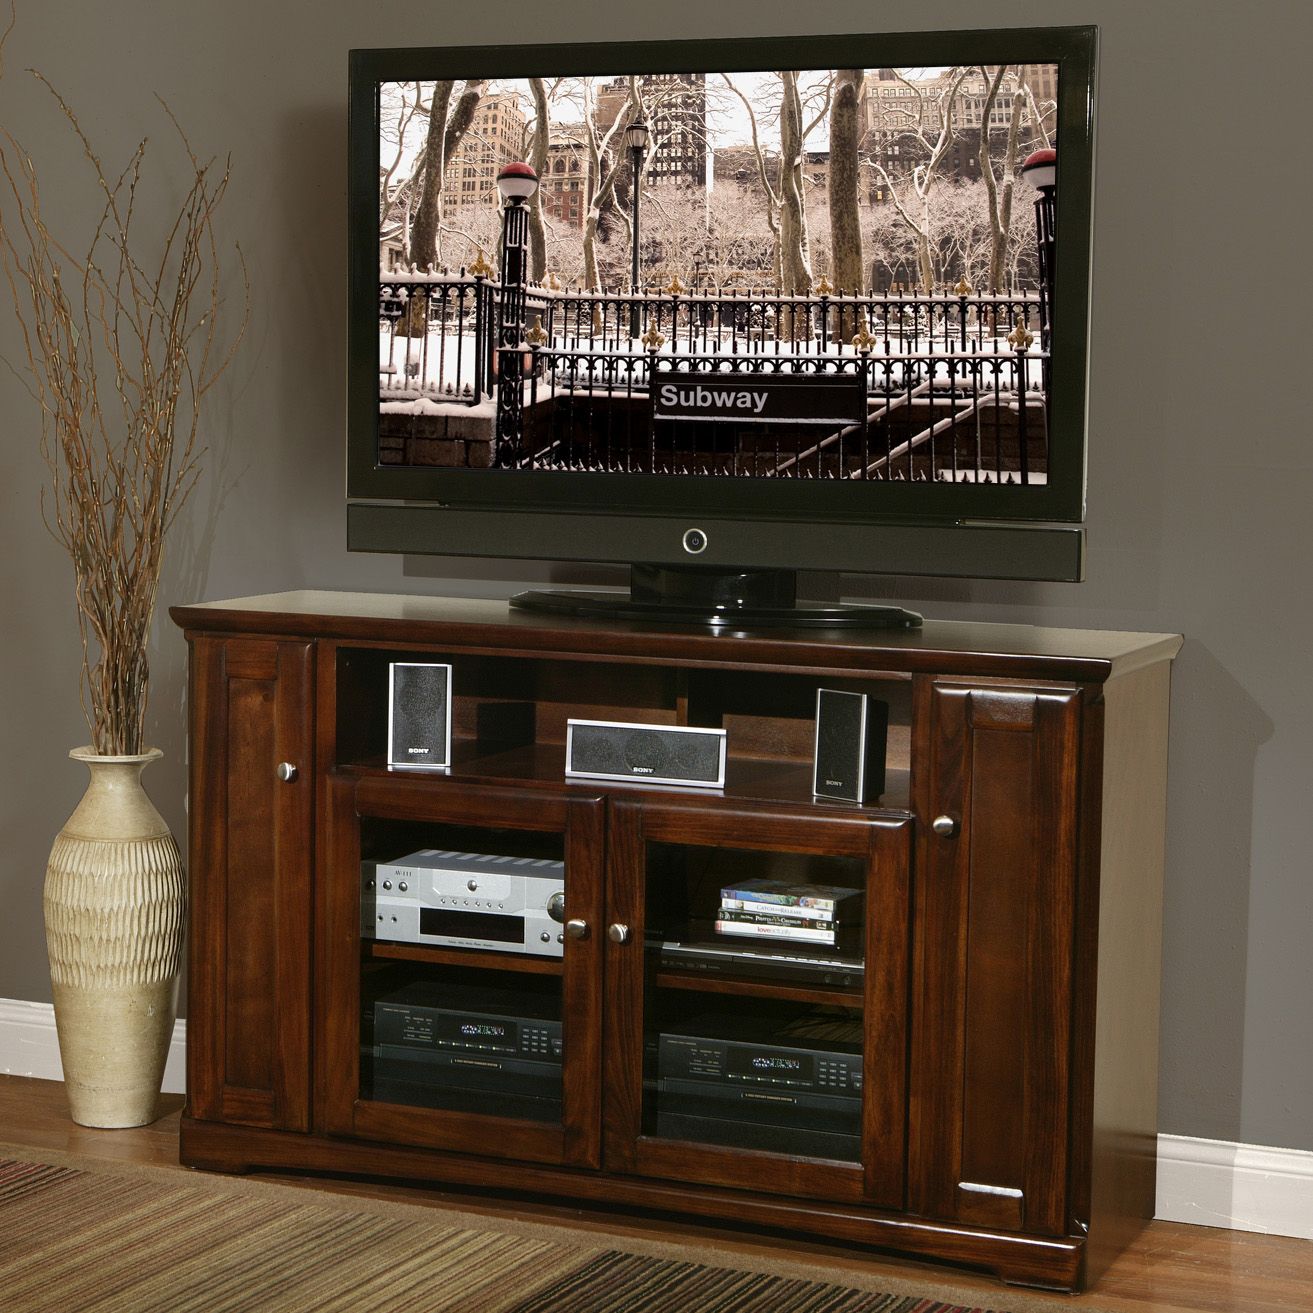 Park View 60 Inch Tv Stand Tallkathy Ireland At Hayneedle Inside Tv Stand Tall Narrow (View 2 of 15)